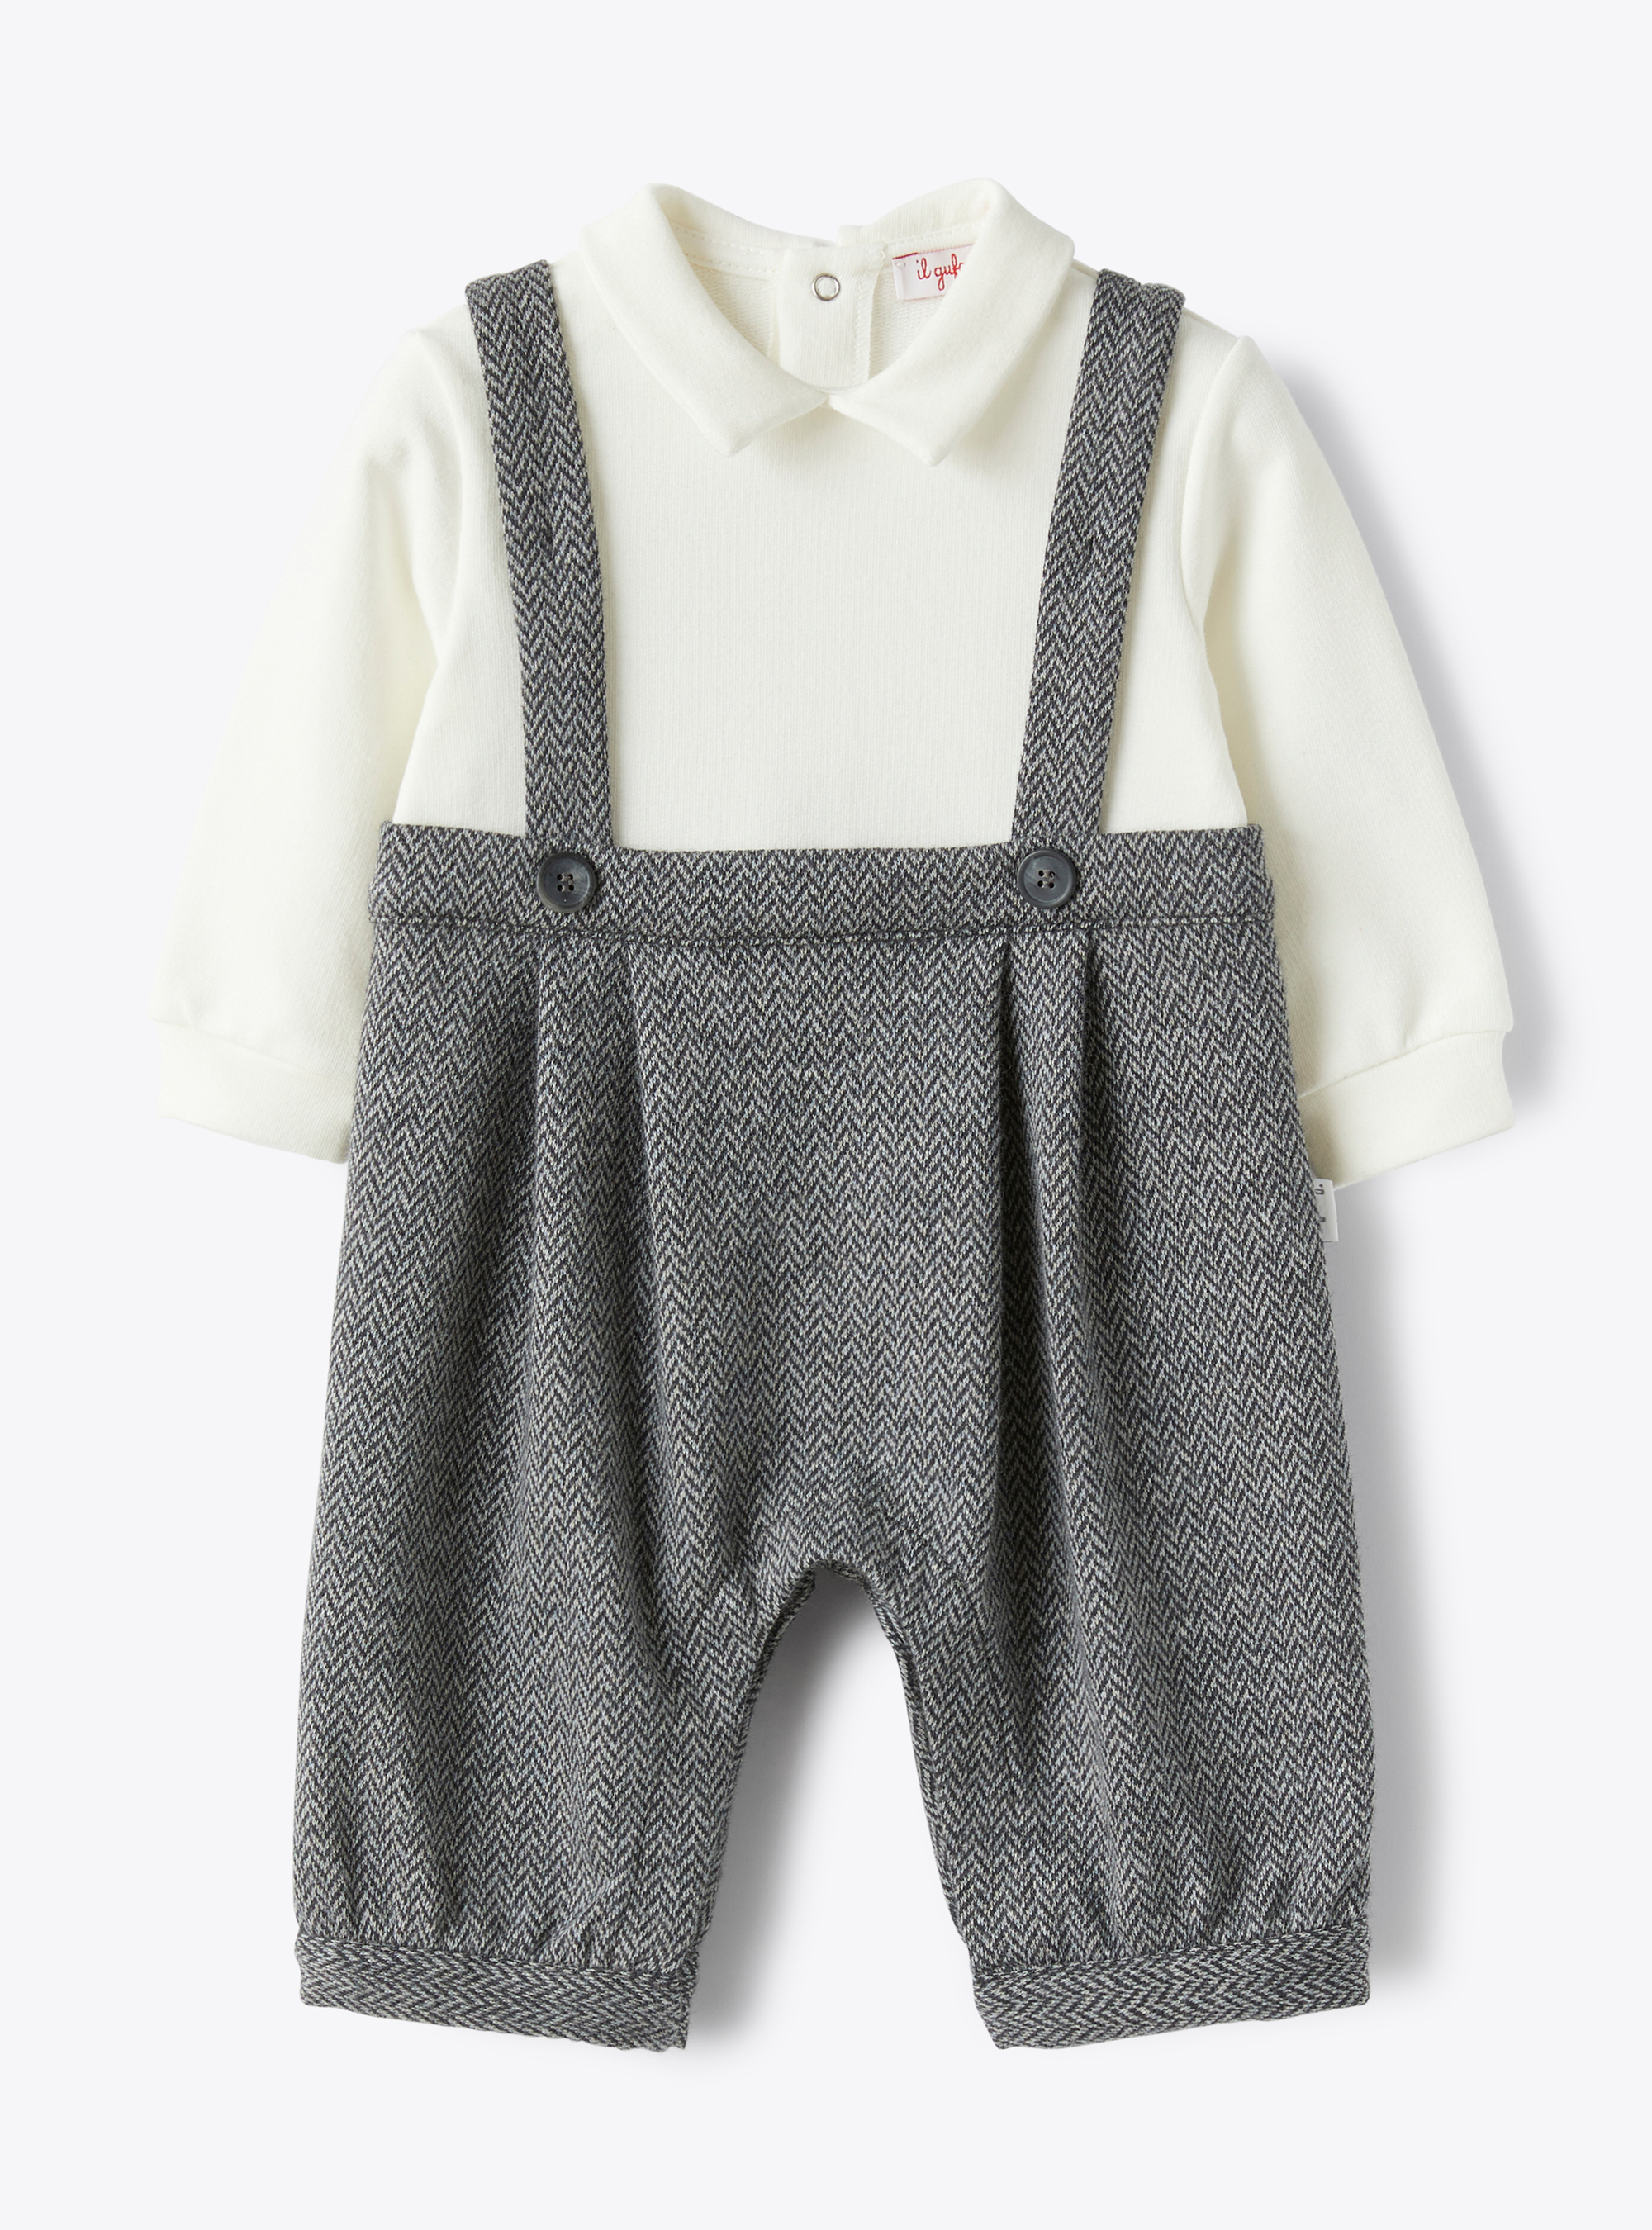 Dungaree playsuit in a herringbone pattern - Babygrows - Il Gufo